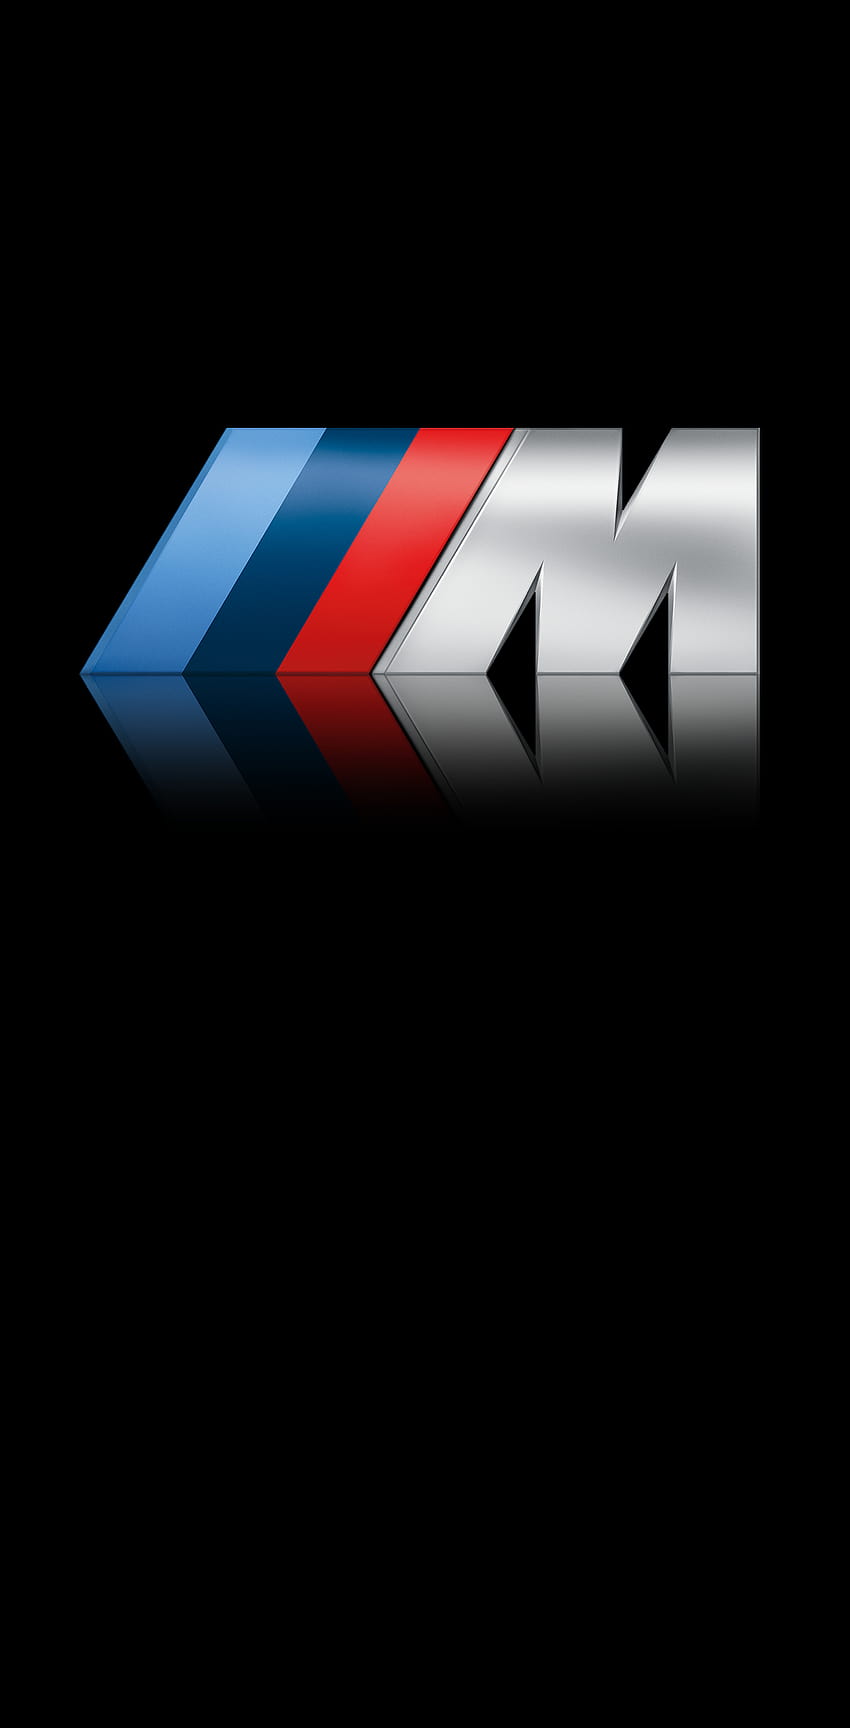 BMW ///M LOGO FOR IPHONE XS MAX [1242x2688] : Amoledbackgrounds, amoled iphone xs max HD phone wallpaper